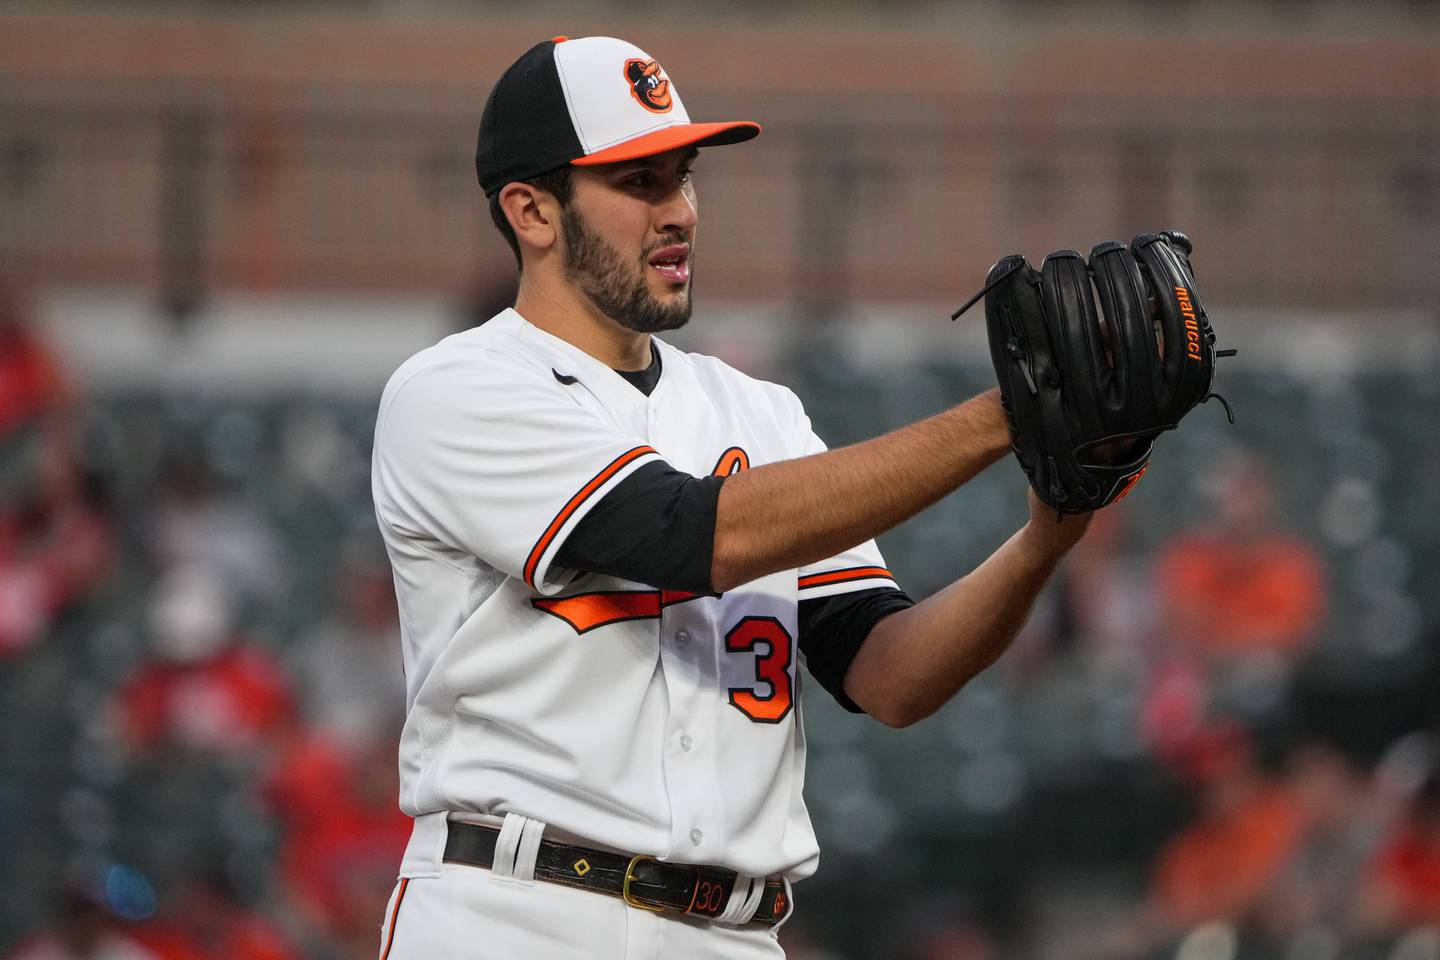 Baltimore Orioles starting pitcher Grayson Rodriguez (30) gets ready to pitch in a baseball game against the Oakland Athletics at Camden Yards on Tuesday, April 11. The Orioles beat the Athletics, 12-8, in the second game of the series.